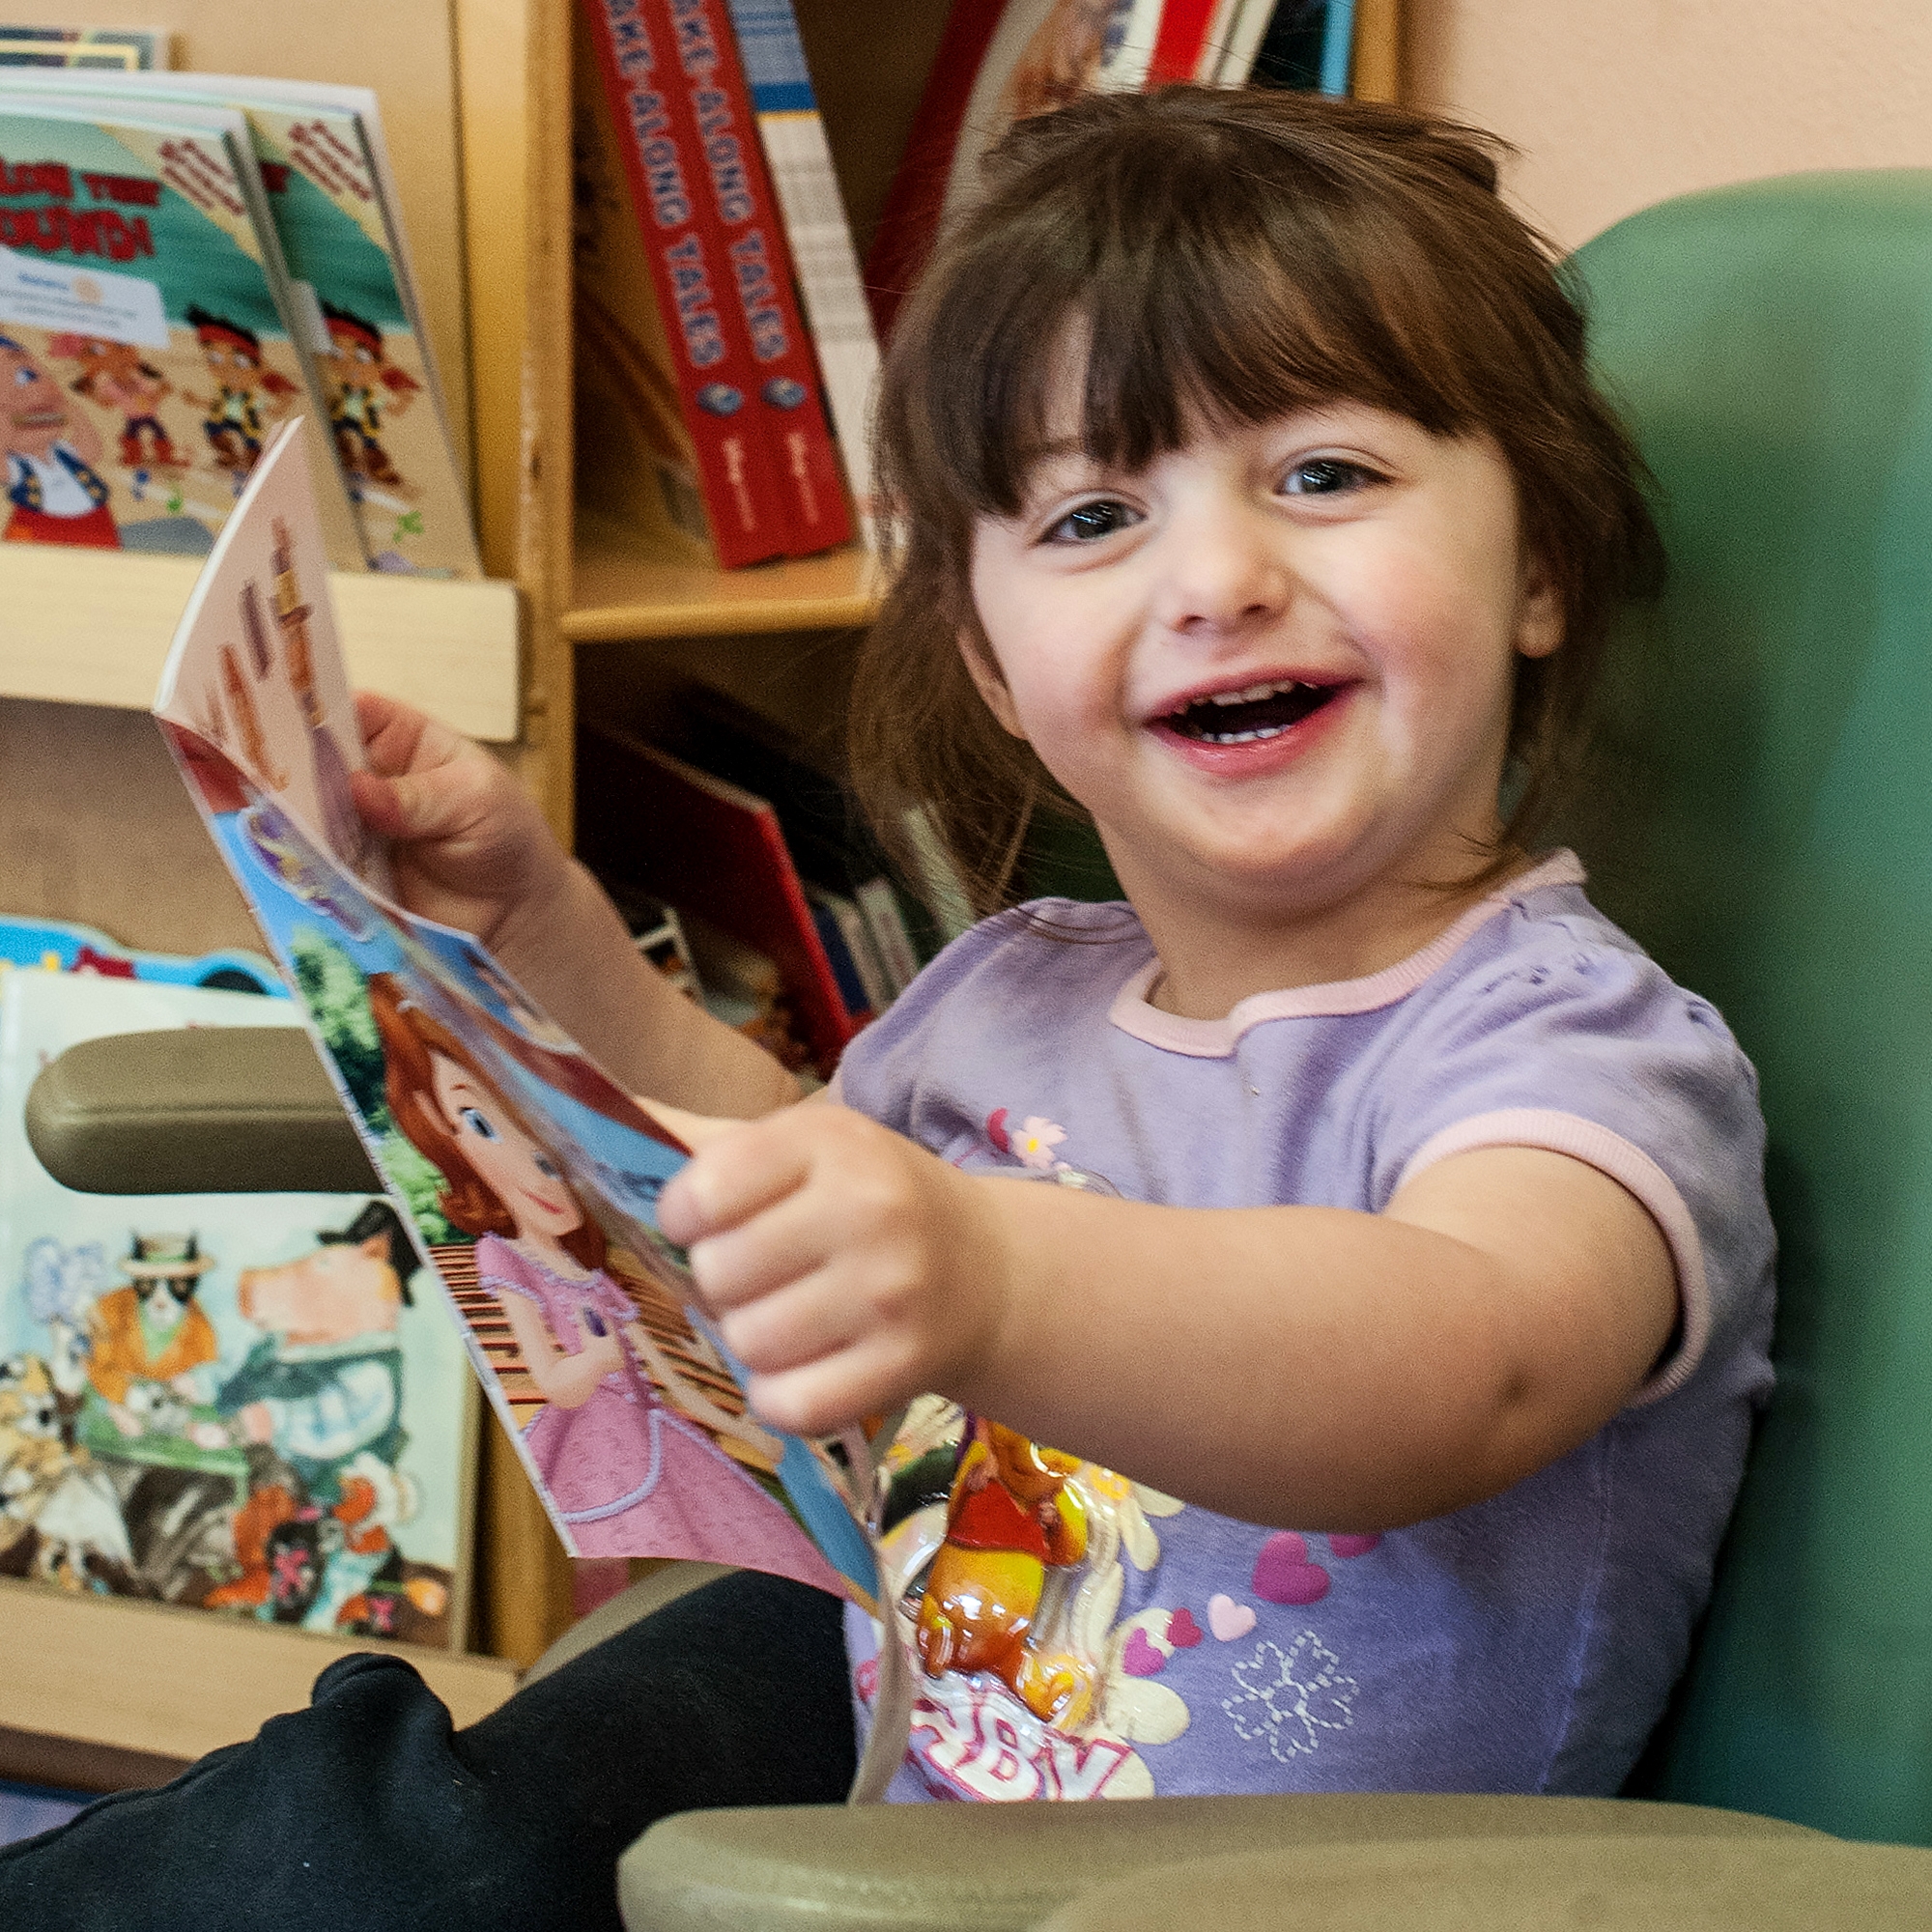 Two-year-old Michelle enjoys the reading corner at the Alamosa Family Medical Center. The reading corner is a new community initiative with local business, housing communities and doctors offices to foster everyday reading with children. Photo credit: Susan Warner / Save the Children 2016.